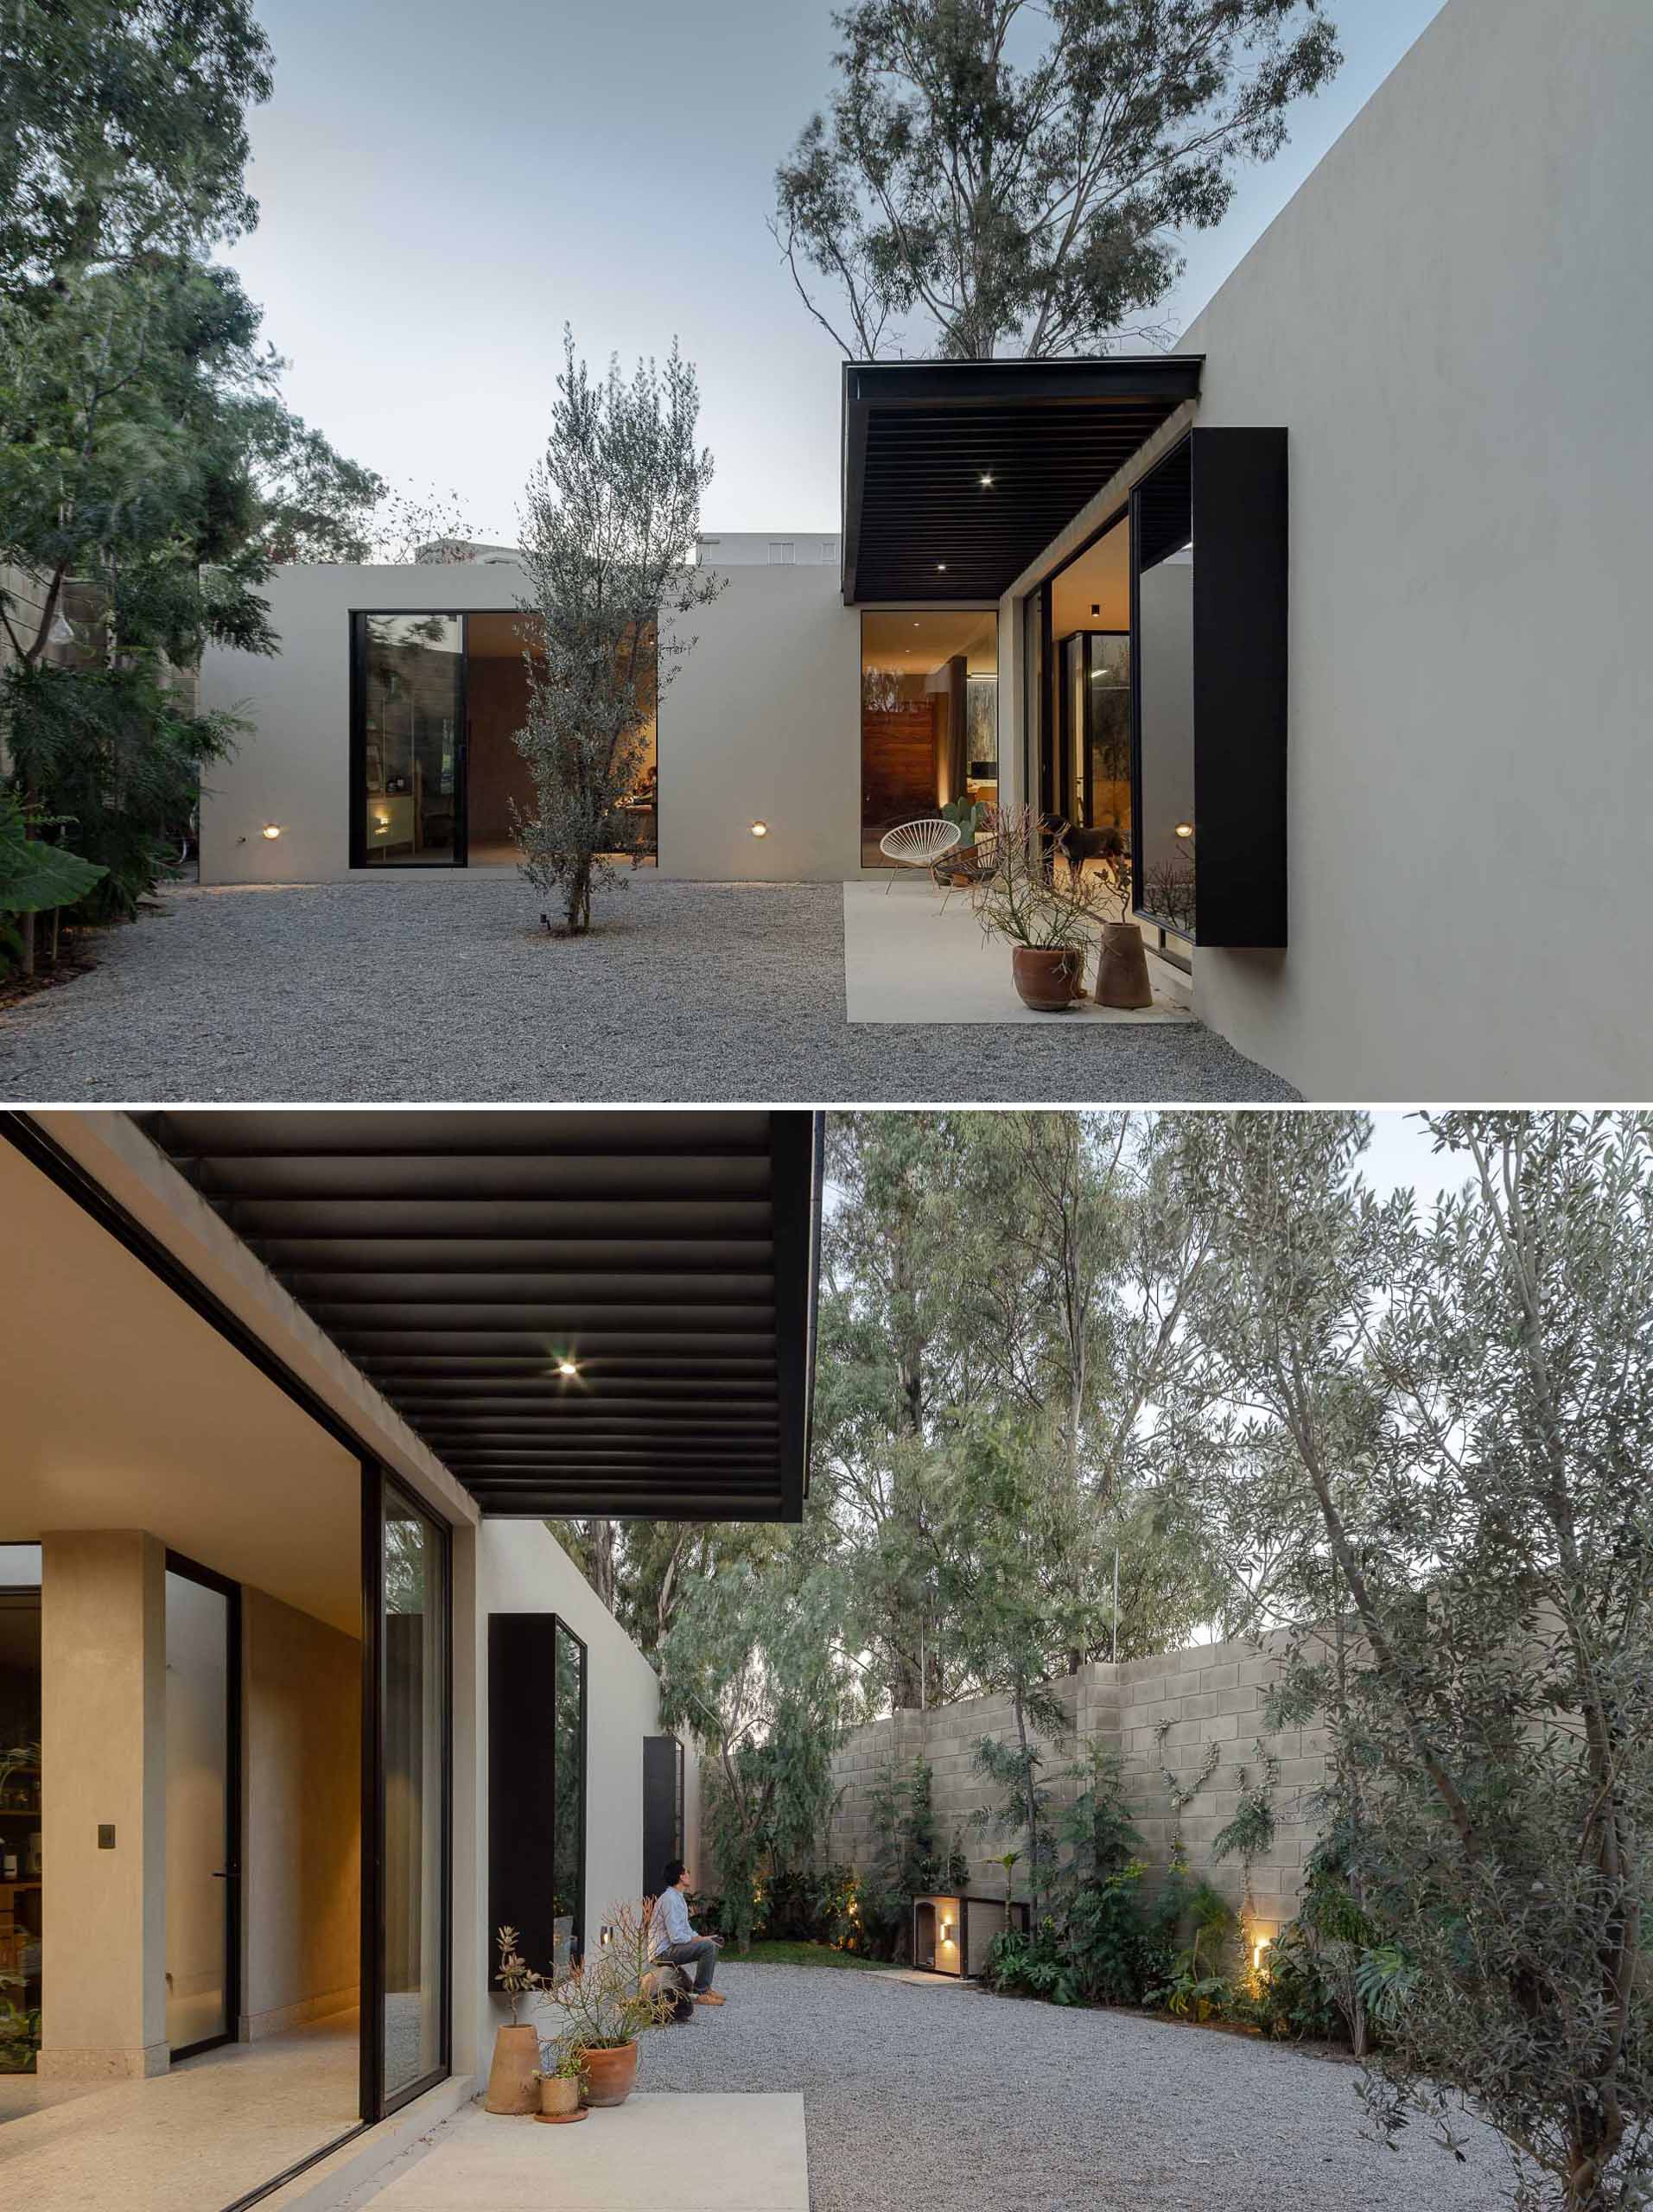 The rear of this modern home has been designed in such a way that the interior spaces open to the low-maintenance gravel patio. Trees and shrubs soften the walls and provide shade. 